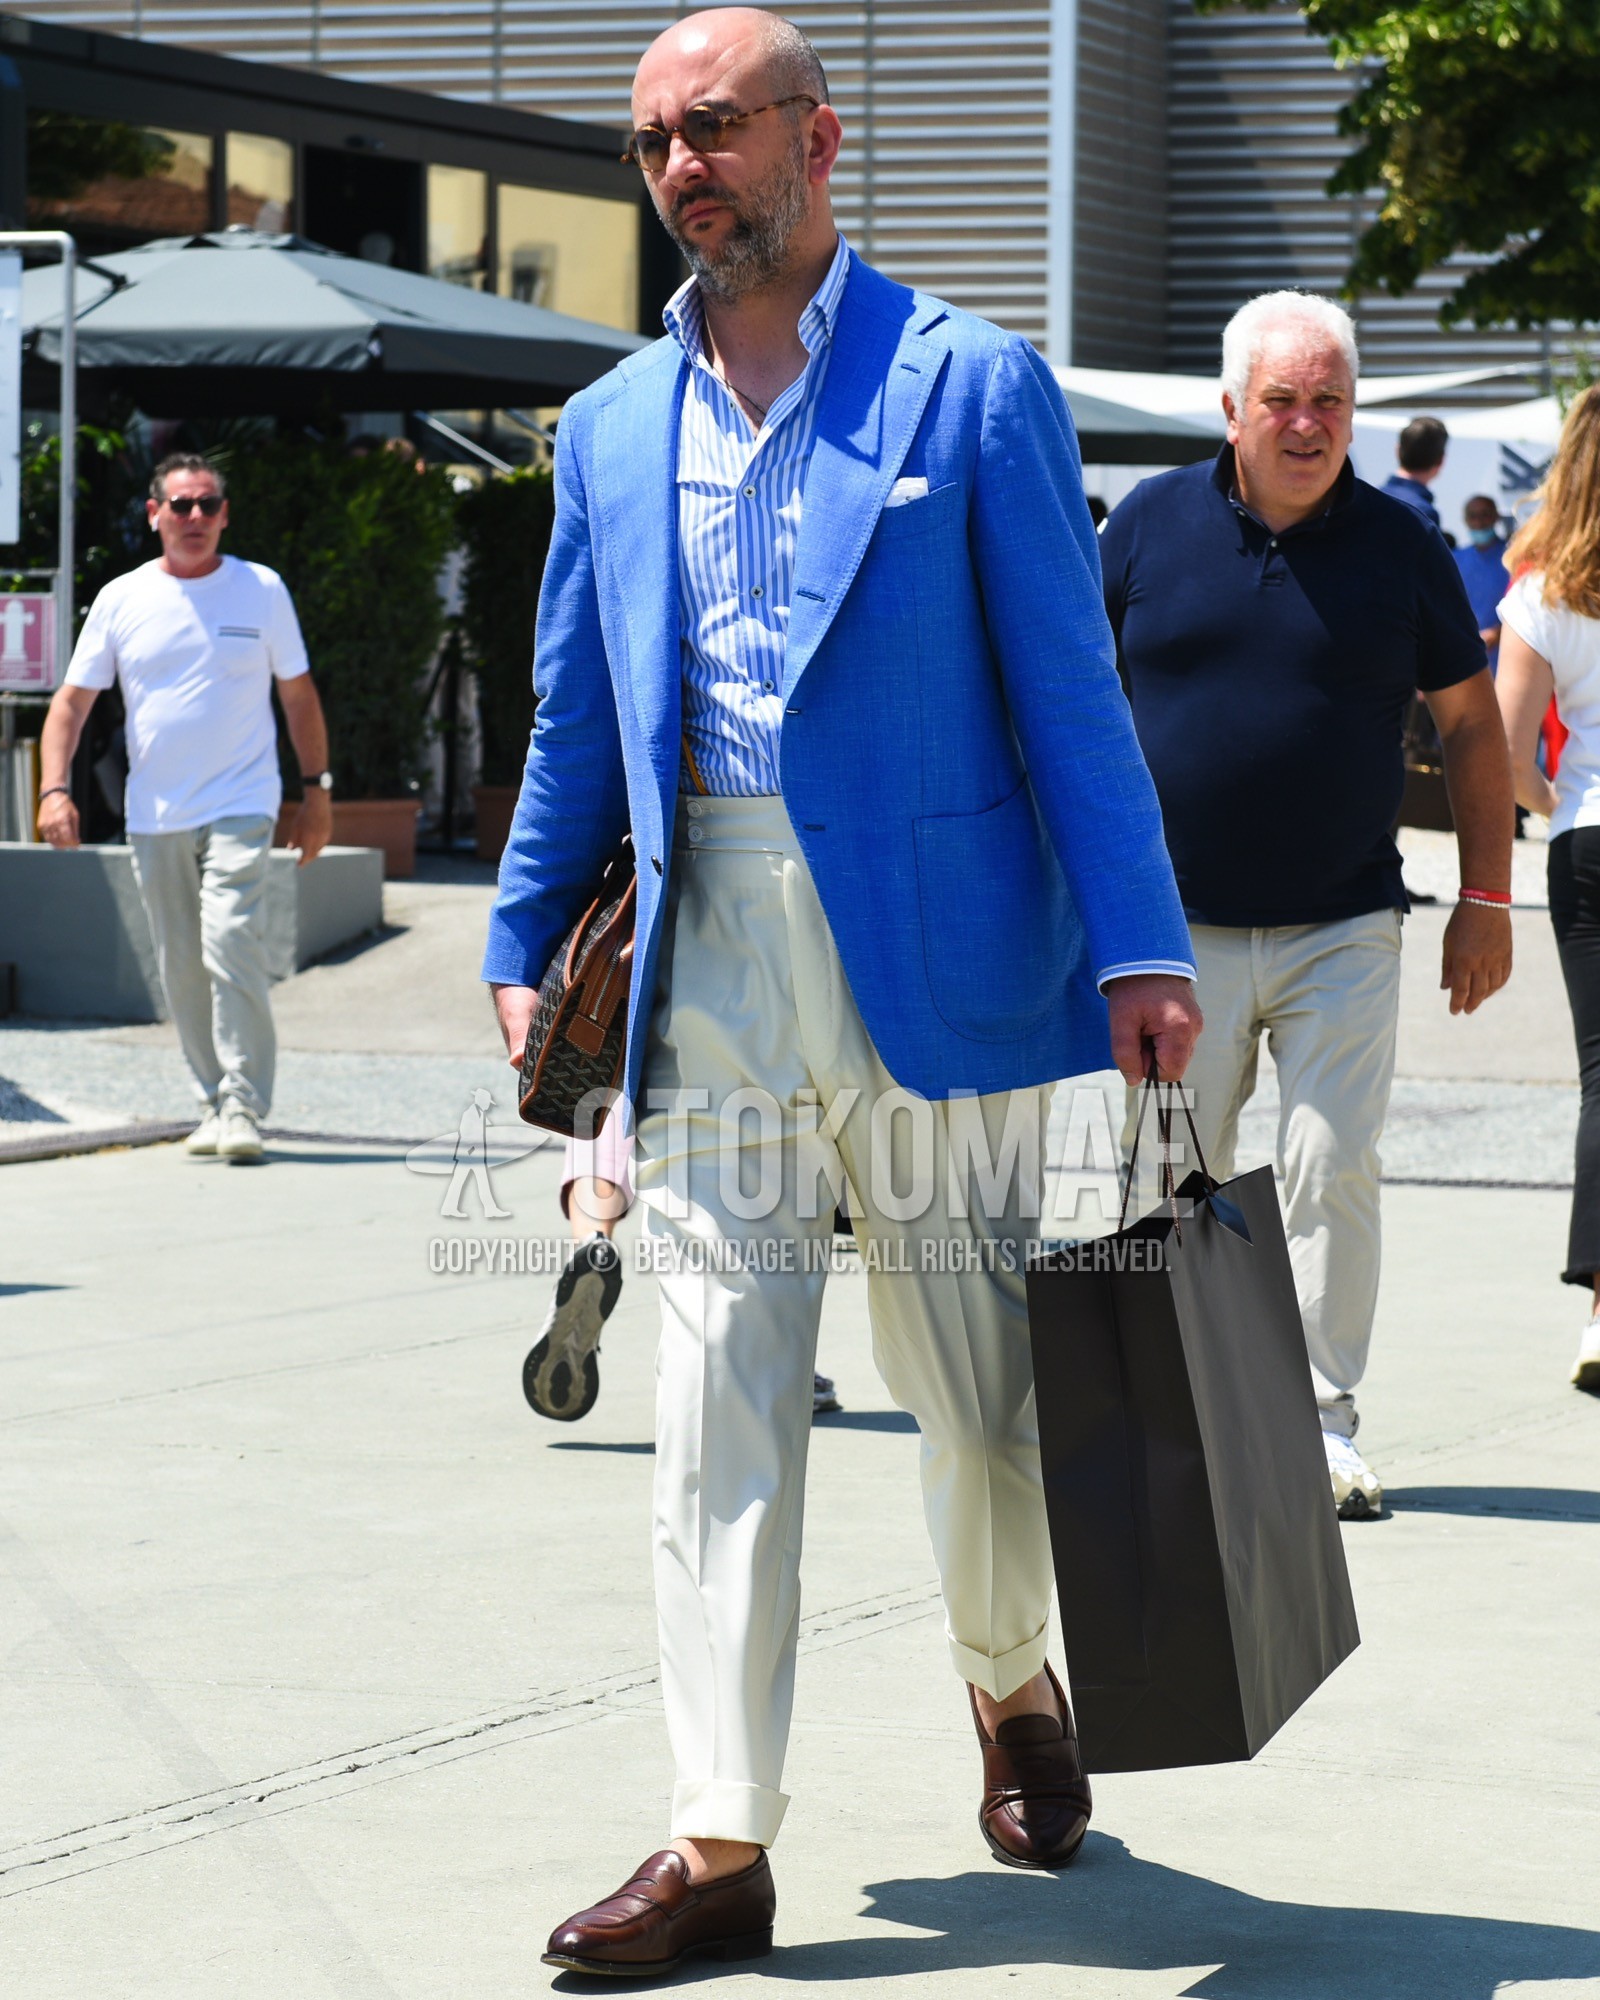 Men's spring summer outfit with brown tortoiseshell sunglasses, blue plain tailored jacket, blue stripes shirt, white plain slacks, brown coin loafers leather shoes, dark gray bag clutch bag/second bag/drawstring bag.